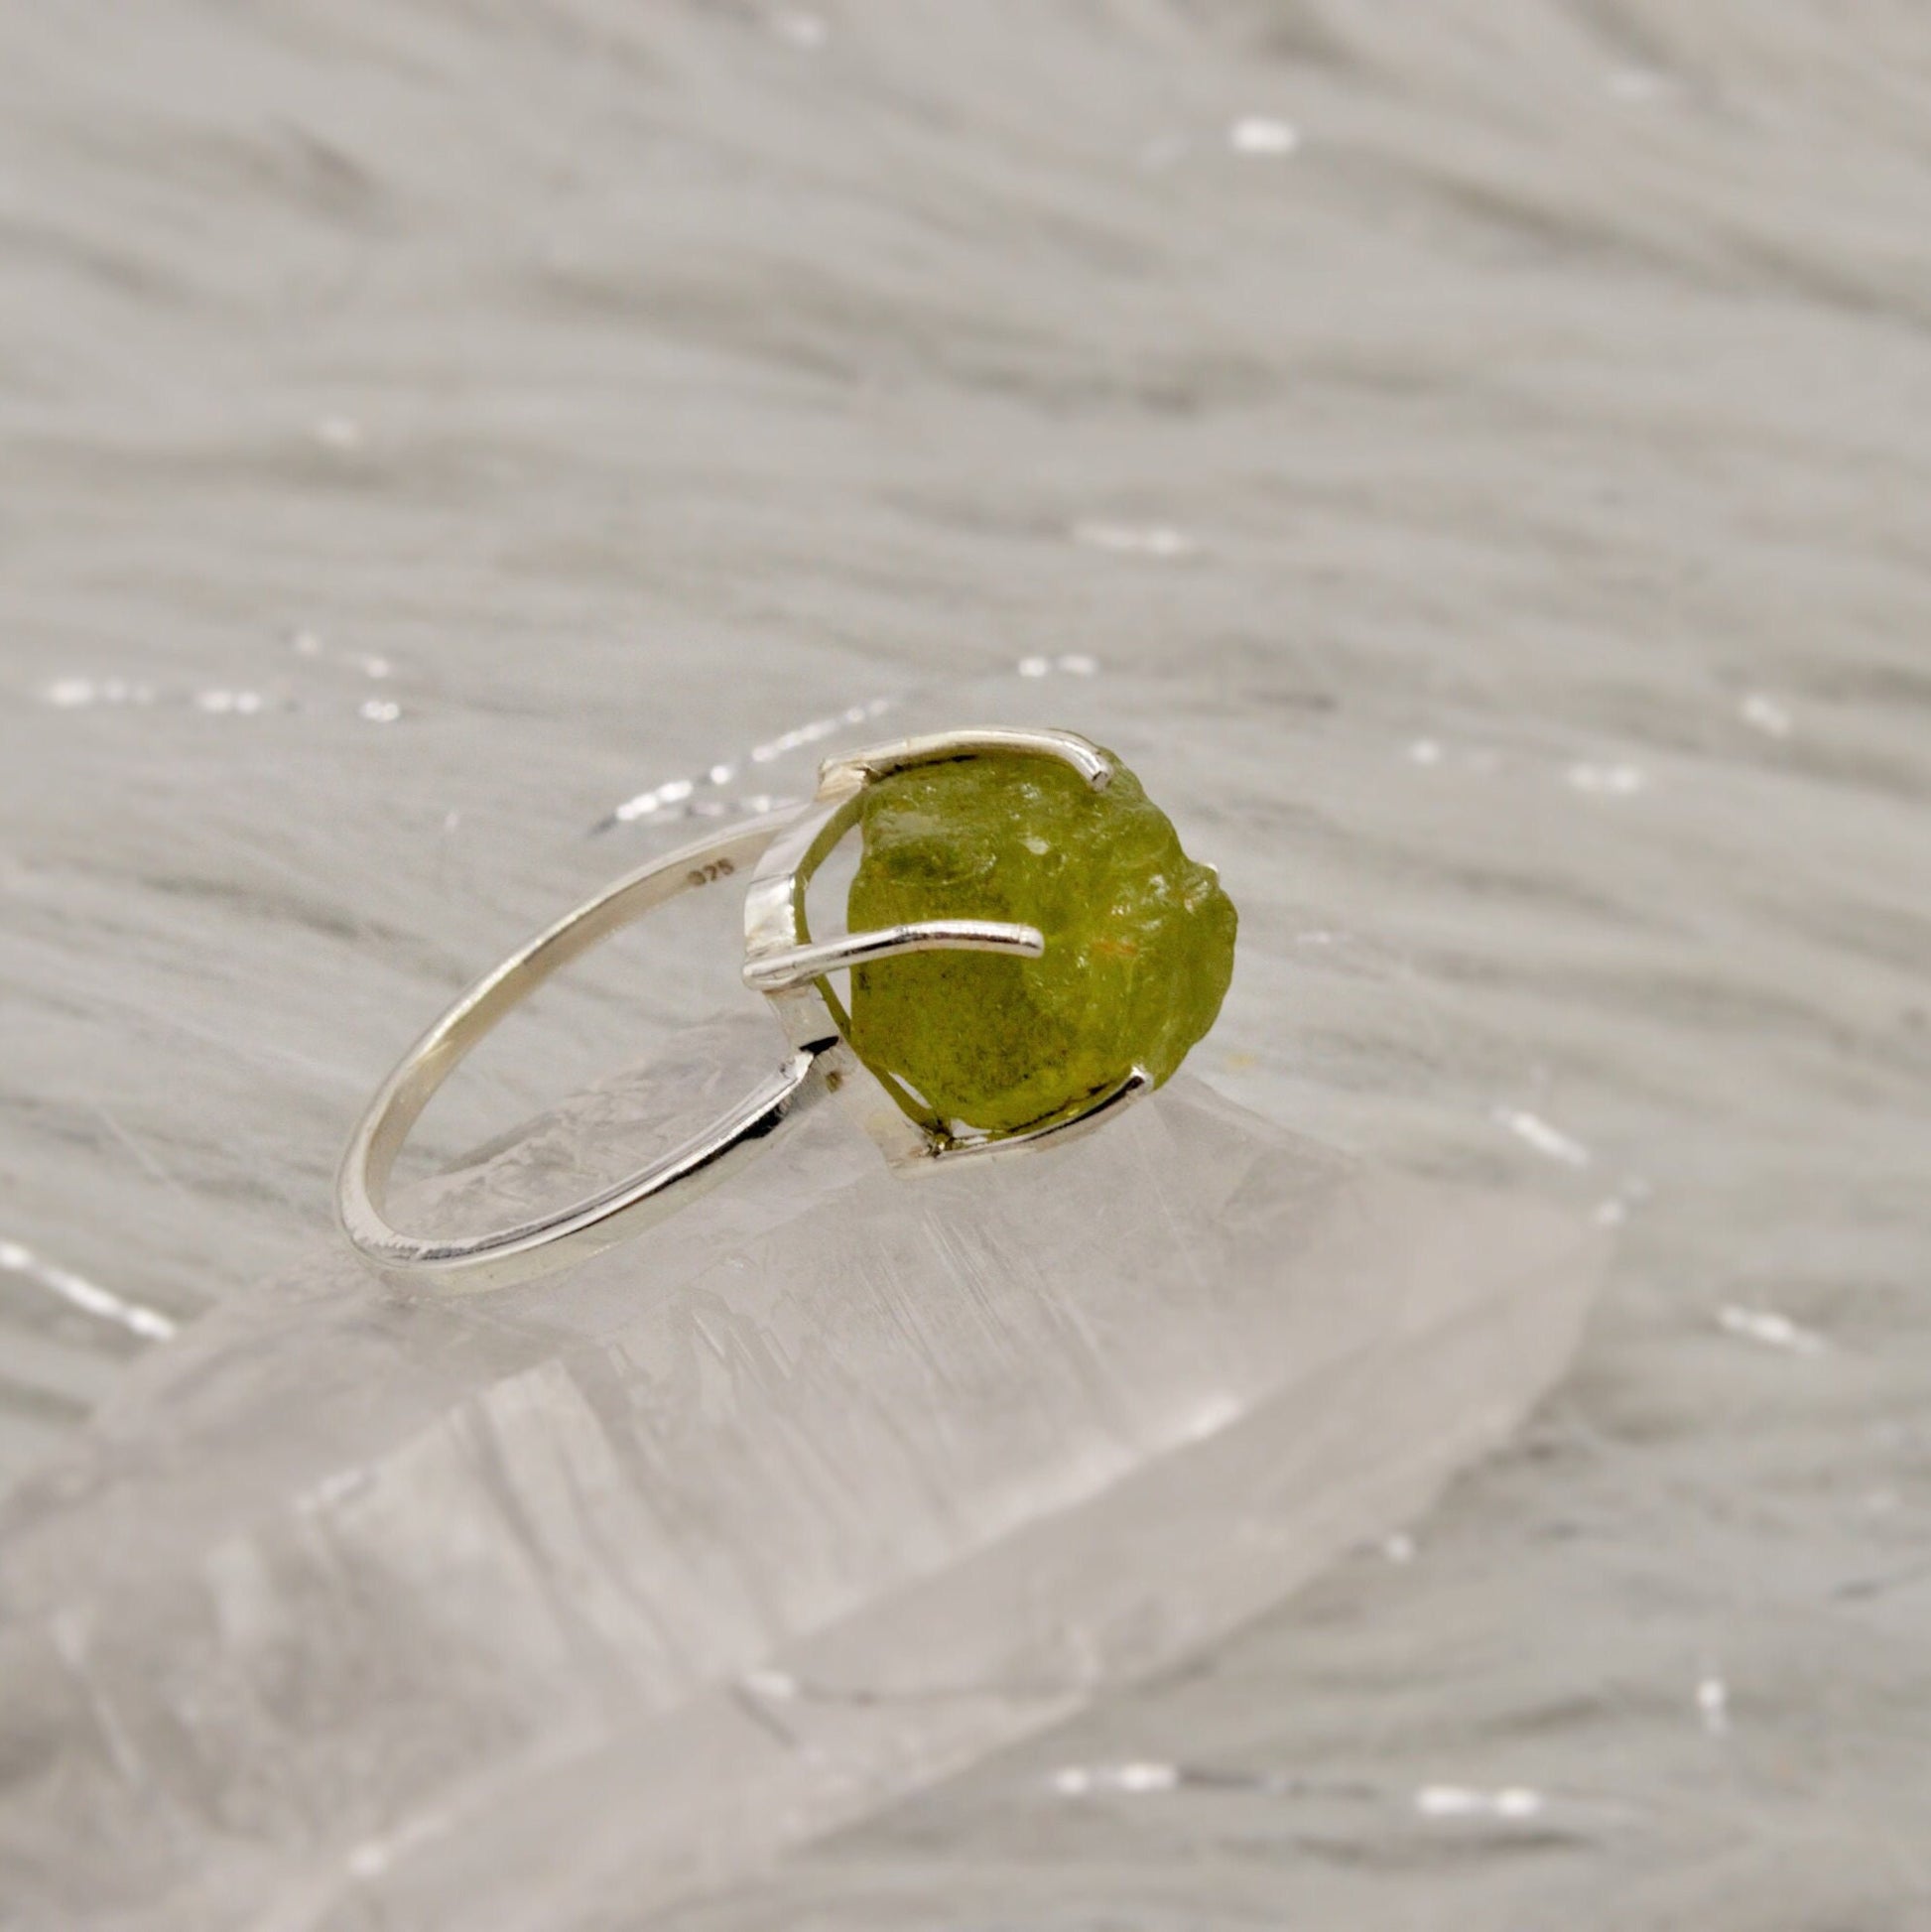 Raw Peridot Ring, Gemstone Ring, August Birthstone Jewelry, UK Size T, Peridot Jewelry, Raw Gem Ring, Rings For Women, Gift For Her